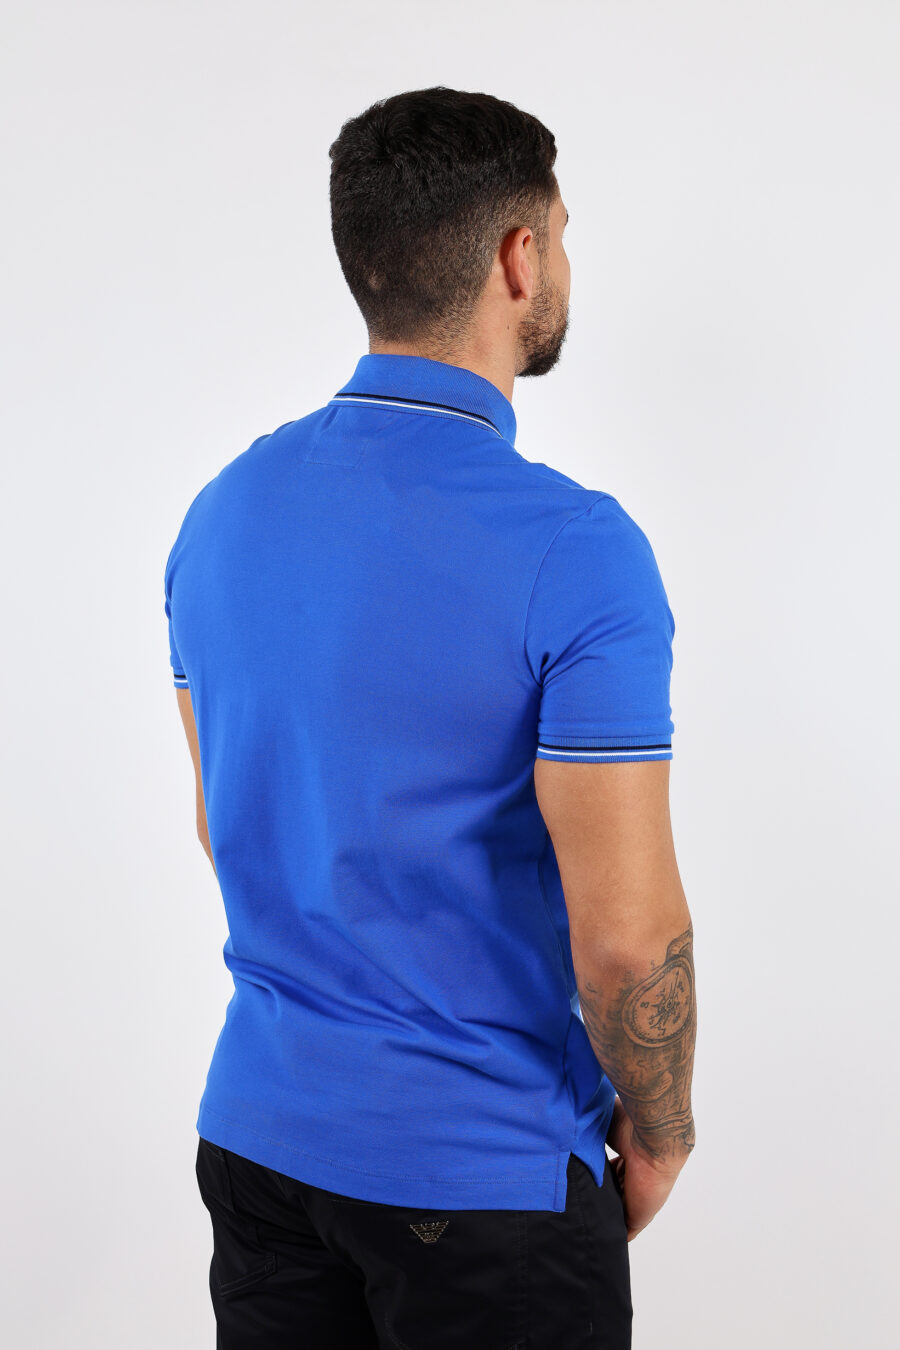 Blue knitted polo shirt with striped collar and mini eagle logo - BLS Fashion 58